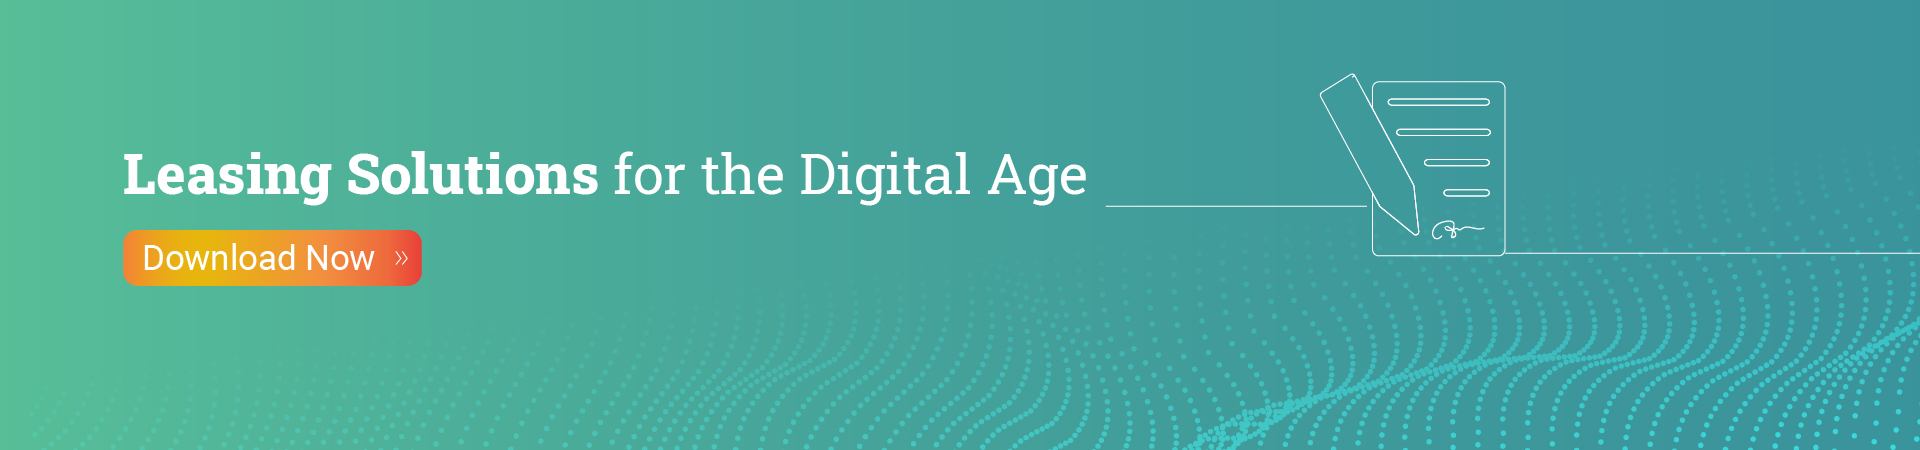 Leasing Solutions for the Digital Age Banner